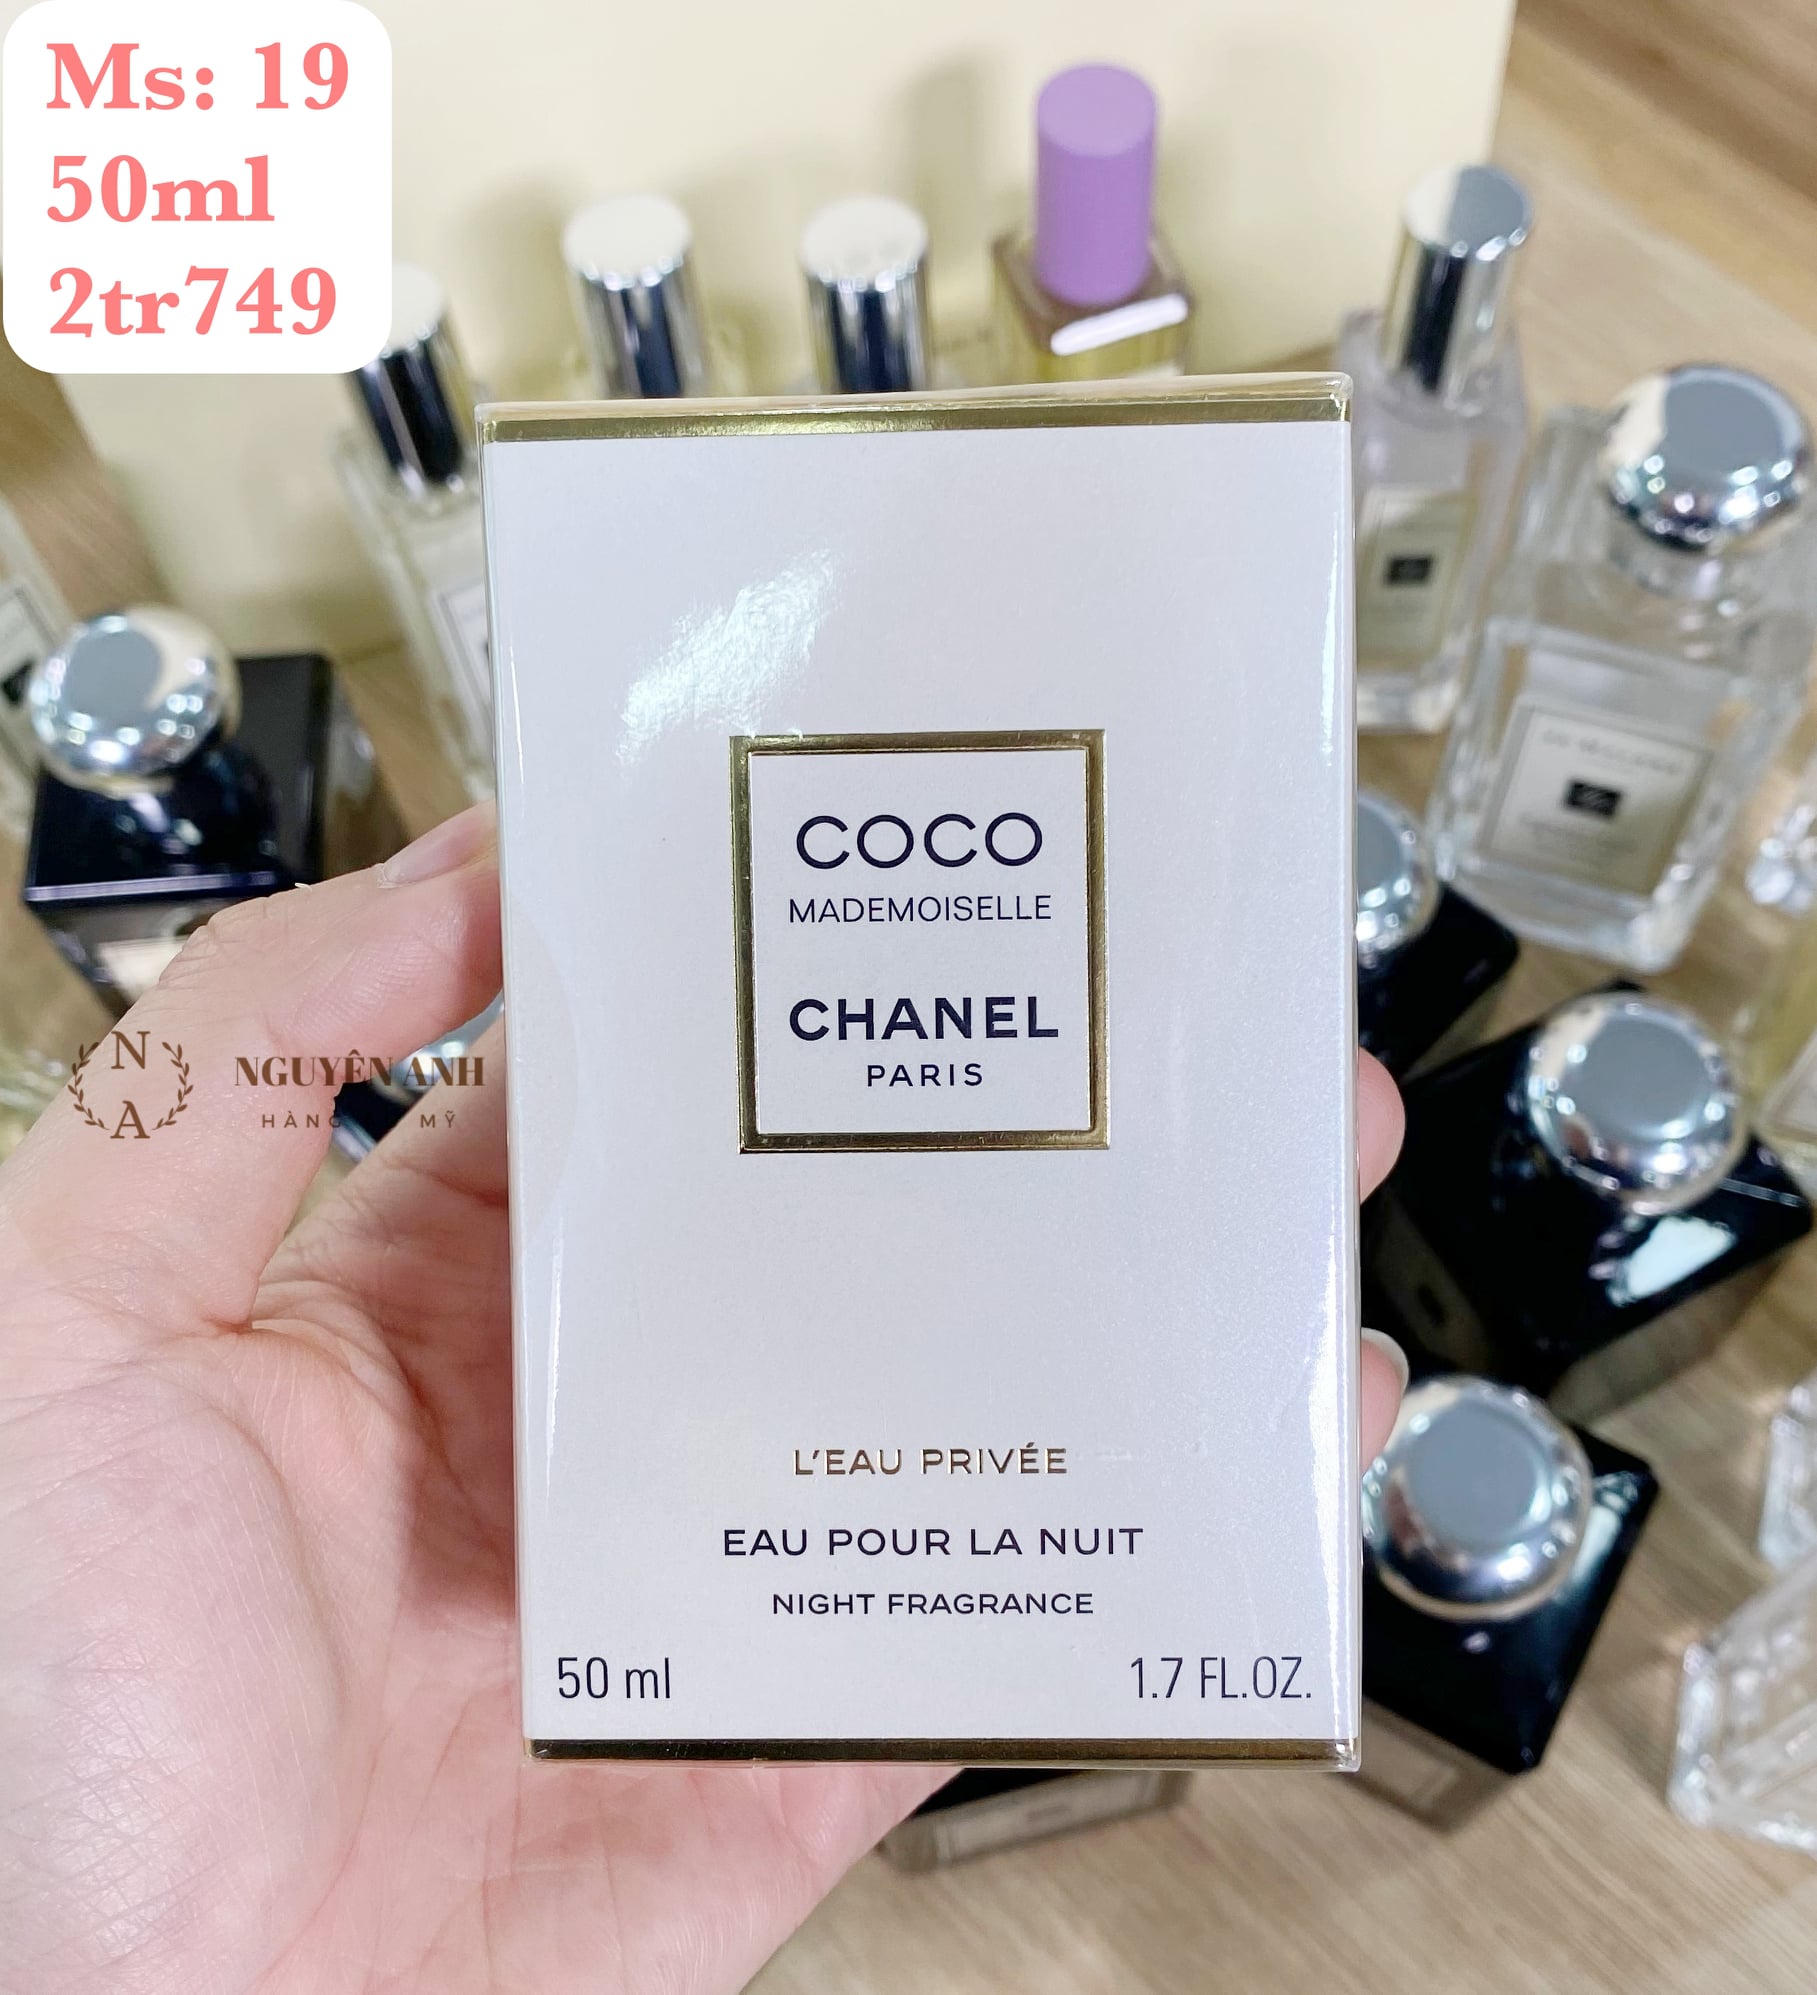 Chanel Perfume Bottles Real Coco by Chanel vs Fake Coco by Chanel